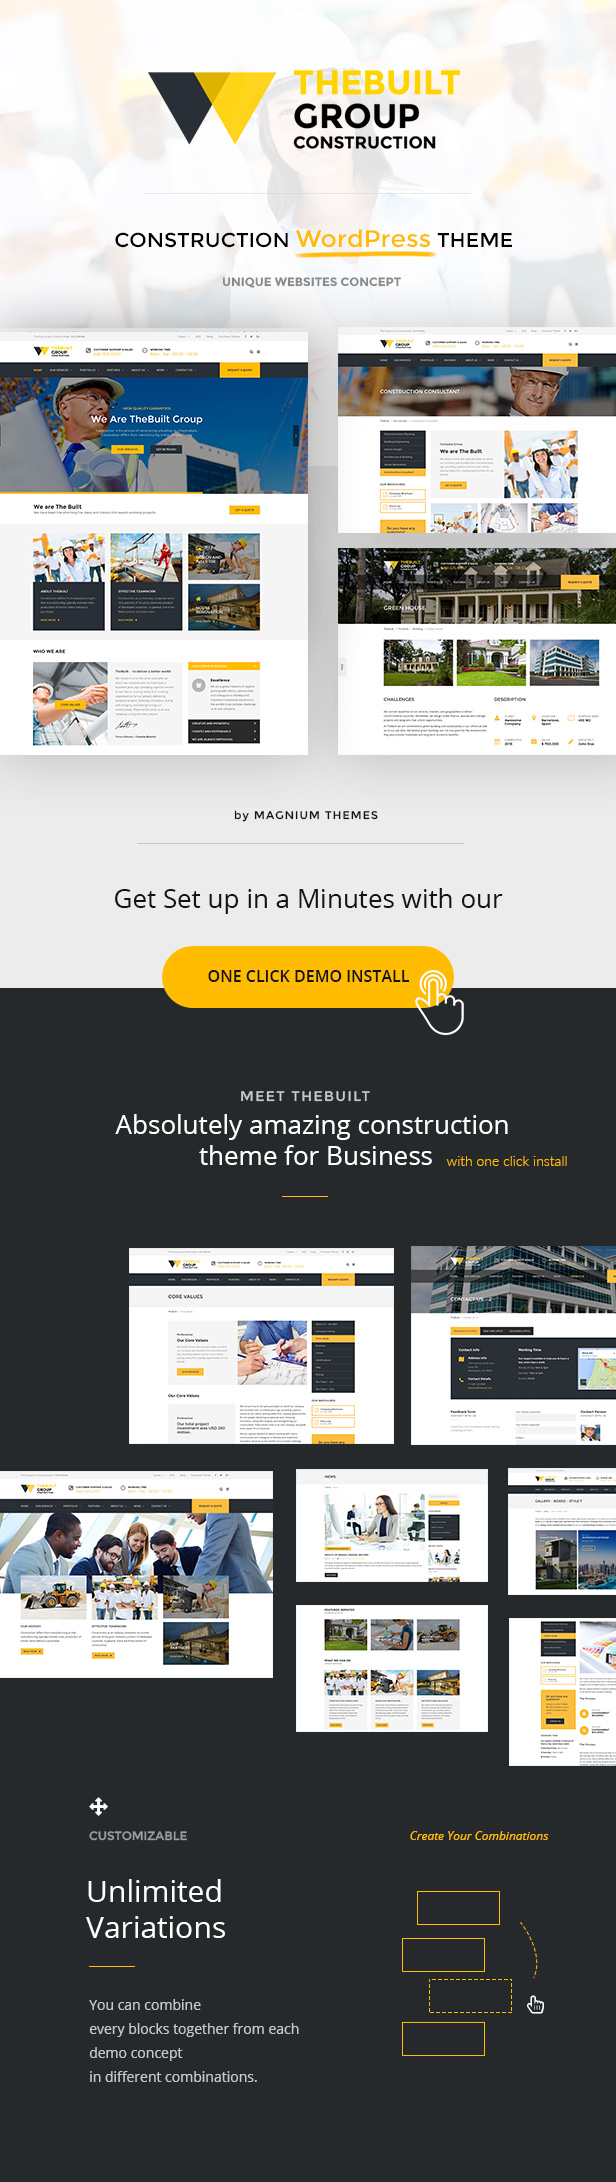 Themeforest 01 27.07 - TheBuilt - Construction and Architecture WordPress theme